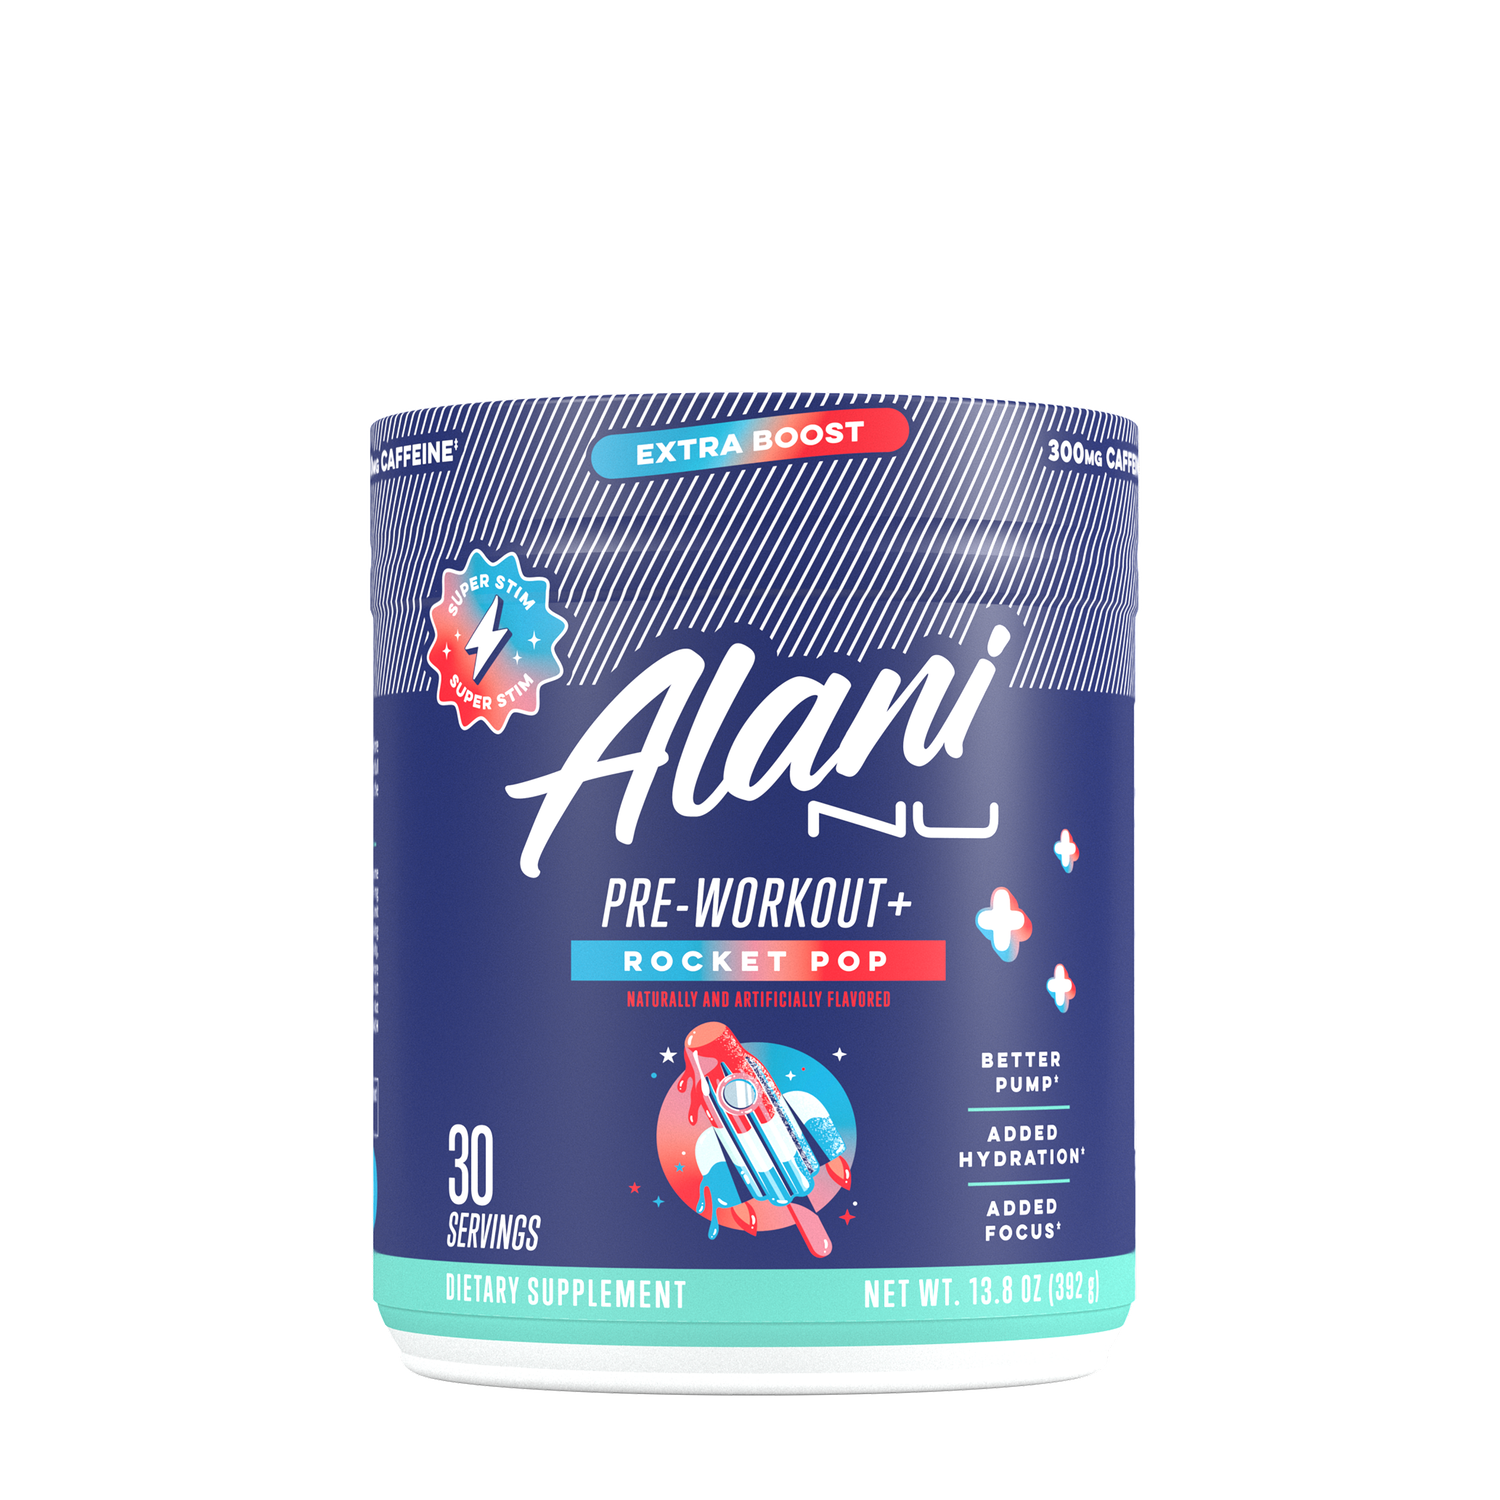 Fat Burner - Metabolism Boost (60 Servings) by Alani Nu at the Vitamin  Shoppe